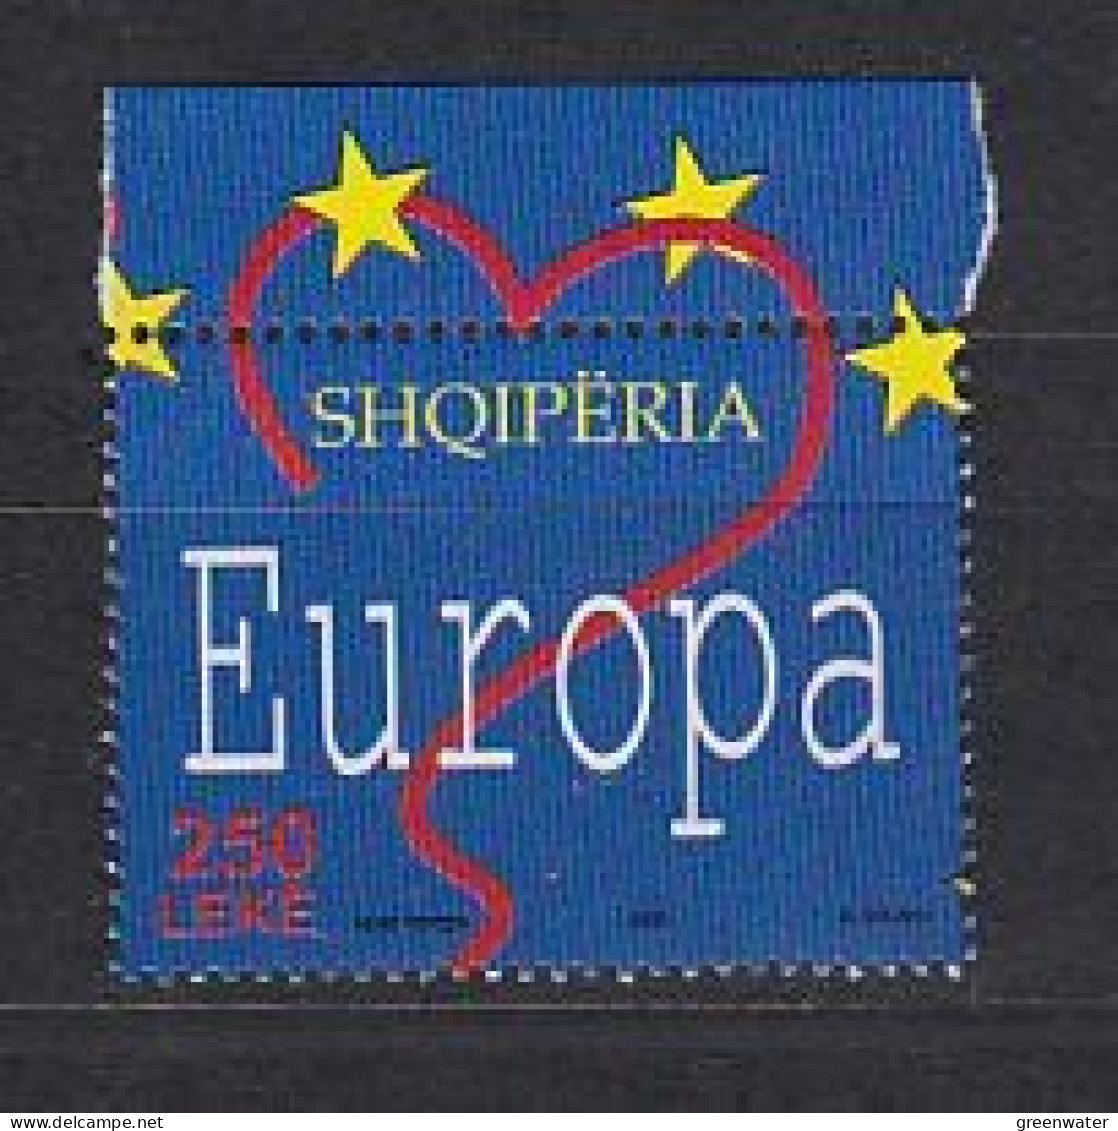 Europa Cept 2008 Albania 1v From M/s ** Mnh (59198) - 2008